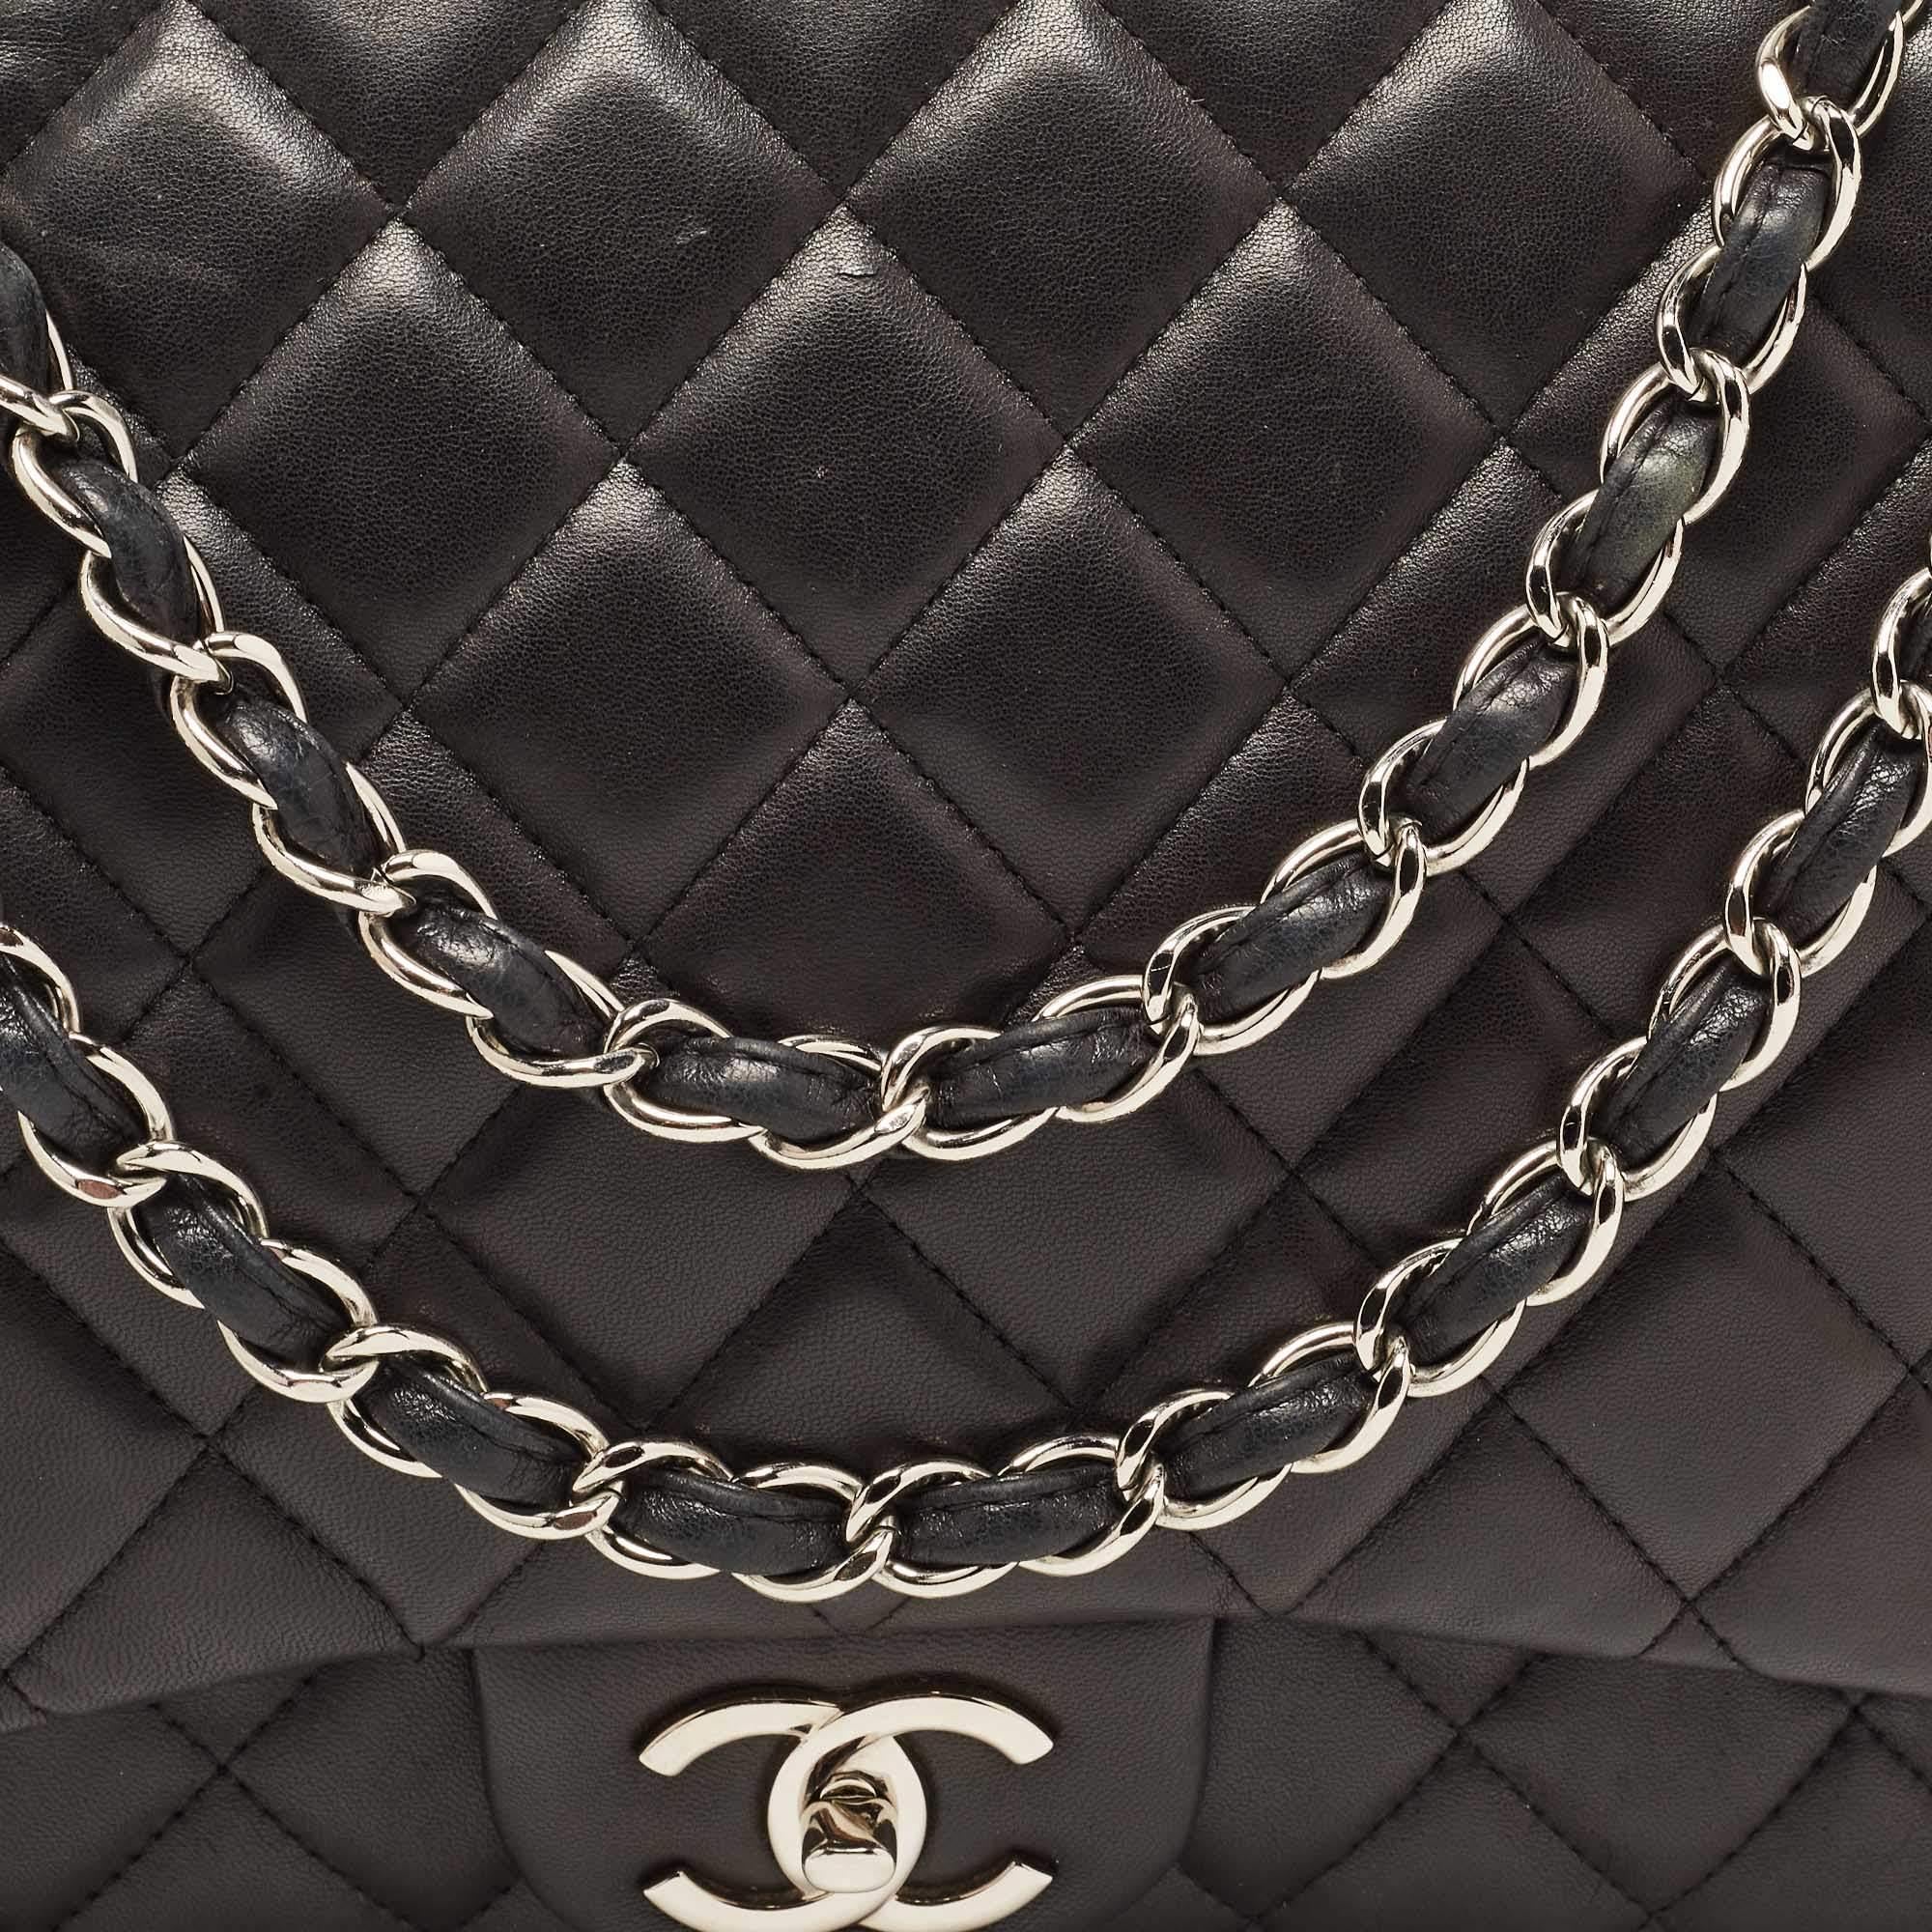 Chanel Black Quilted Leather Maxi Classic Double Flap Bag For Sale 1